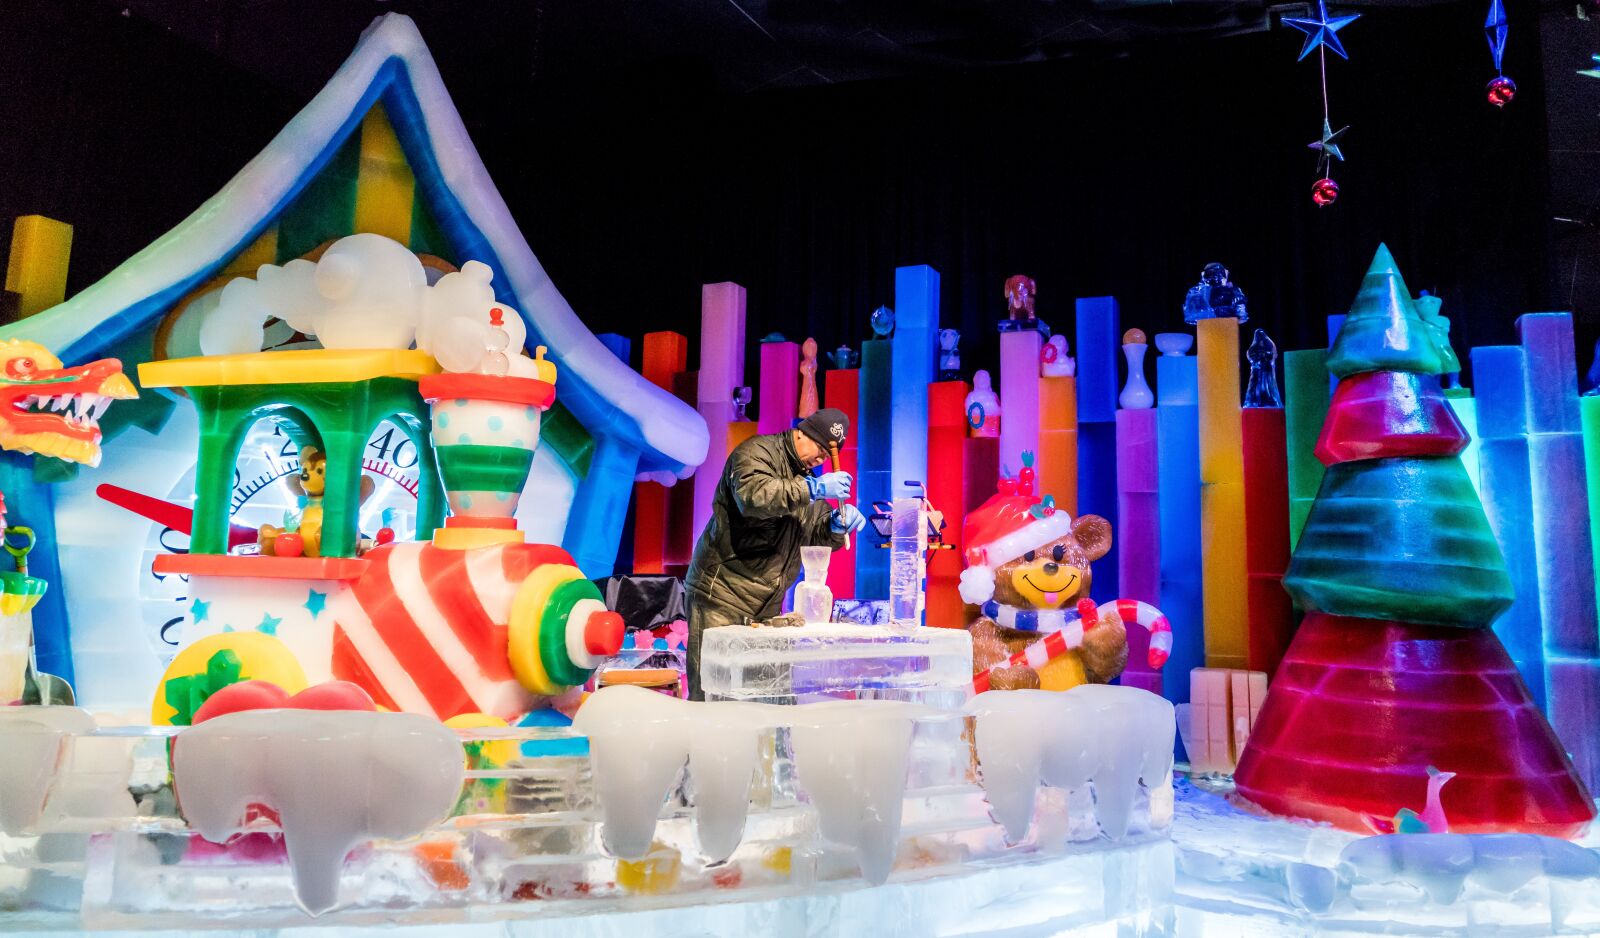 Sony a7R II sample photo. Ice sculptures, gaylord palms photography